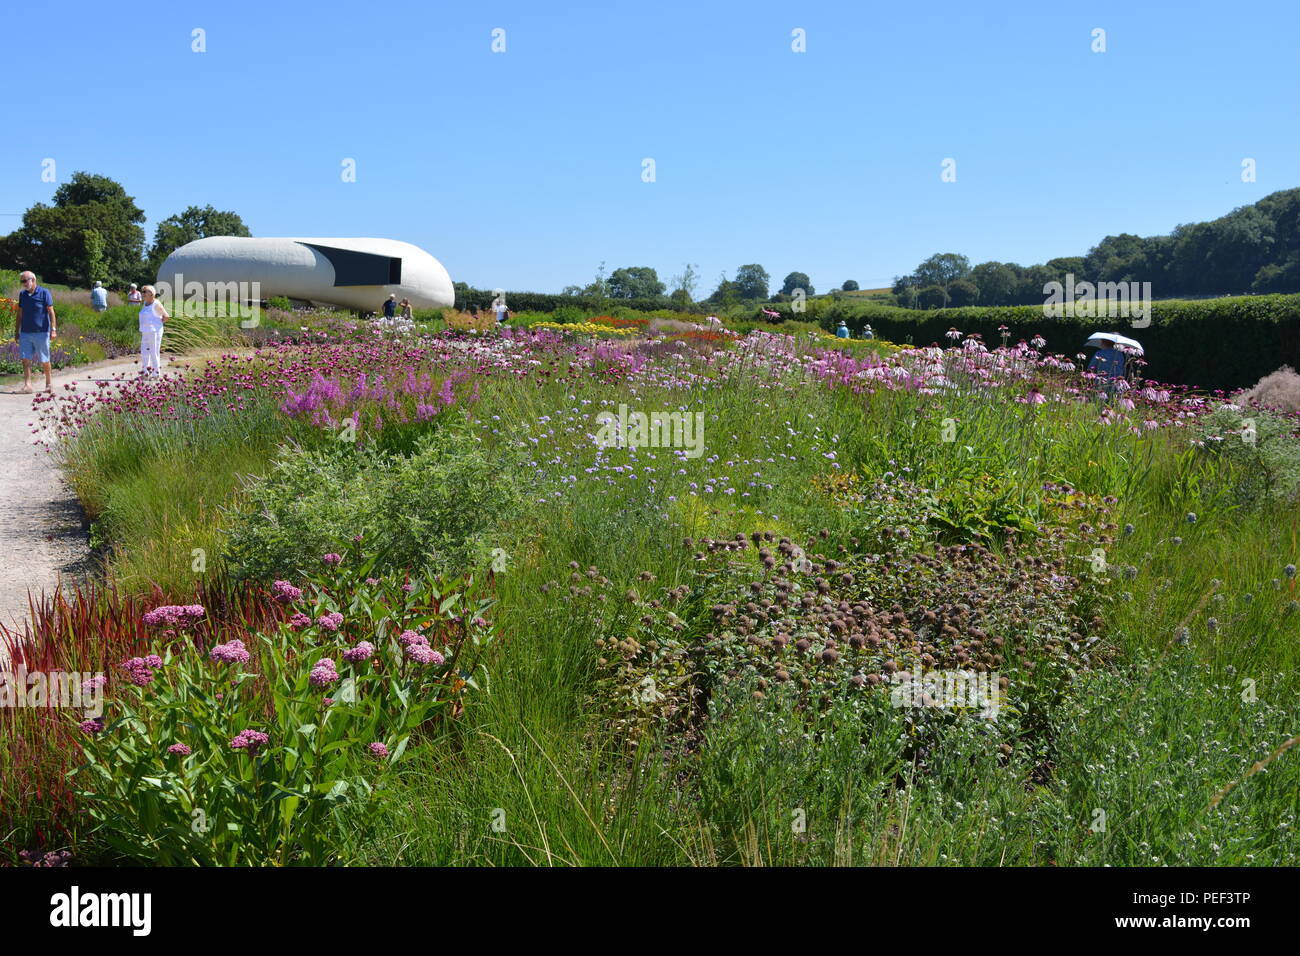 View over Oudolf Field, designed by renowned landscape architect Piet Oudolf, to  Radić Pavilion, designed by Smiljan Radić, Hauser & Wirth, Somerset Stock Photo